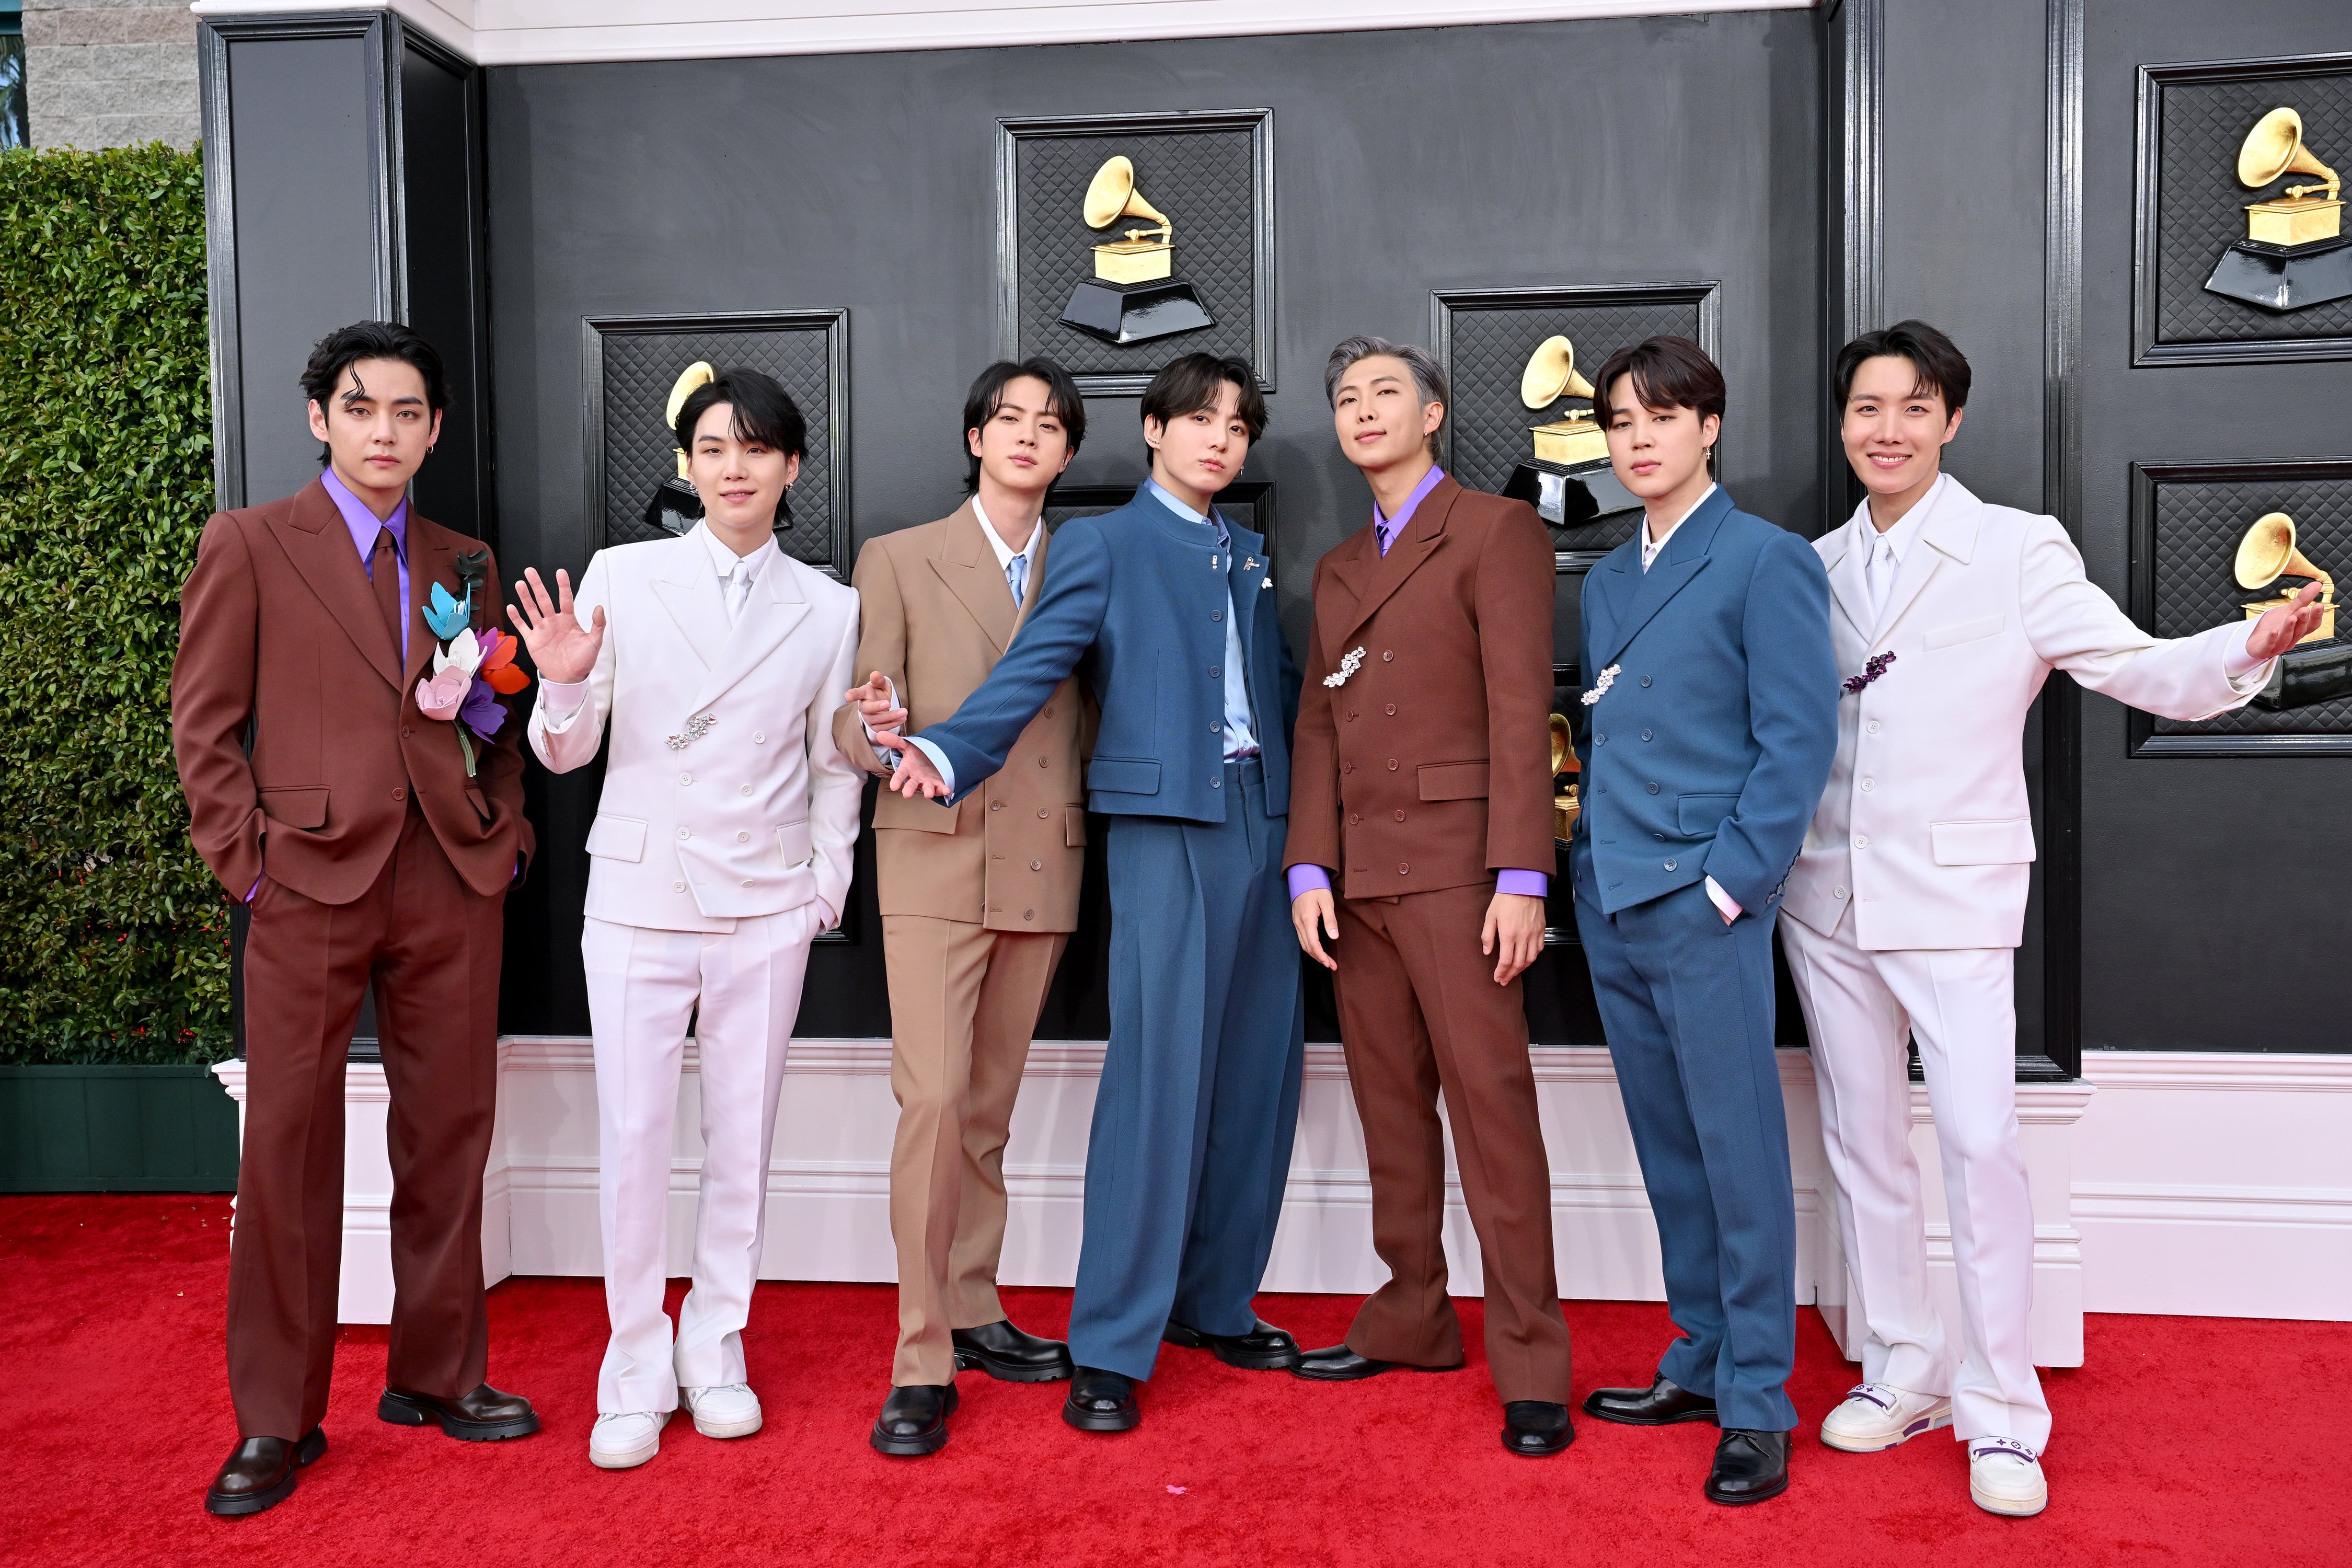 BTS will attend the Grammys to present an award